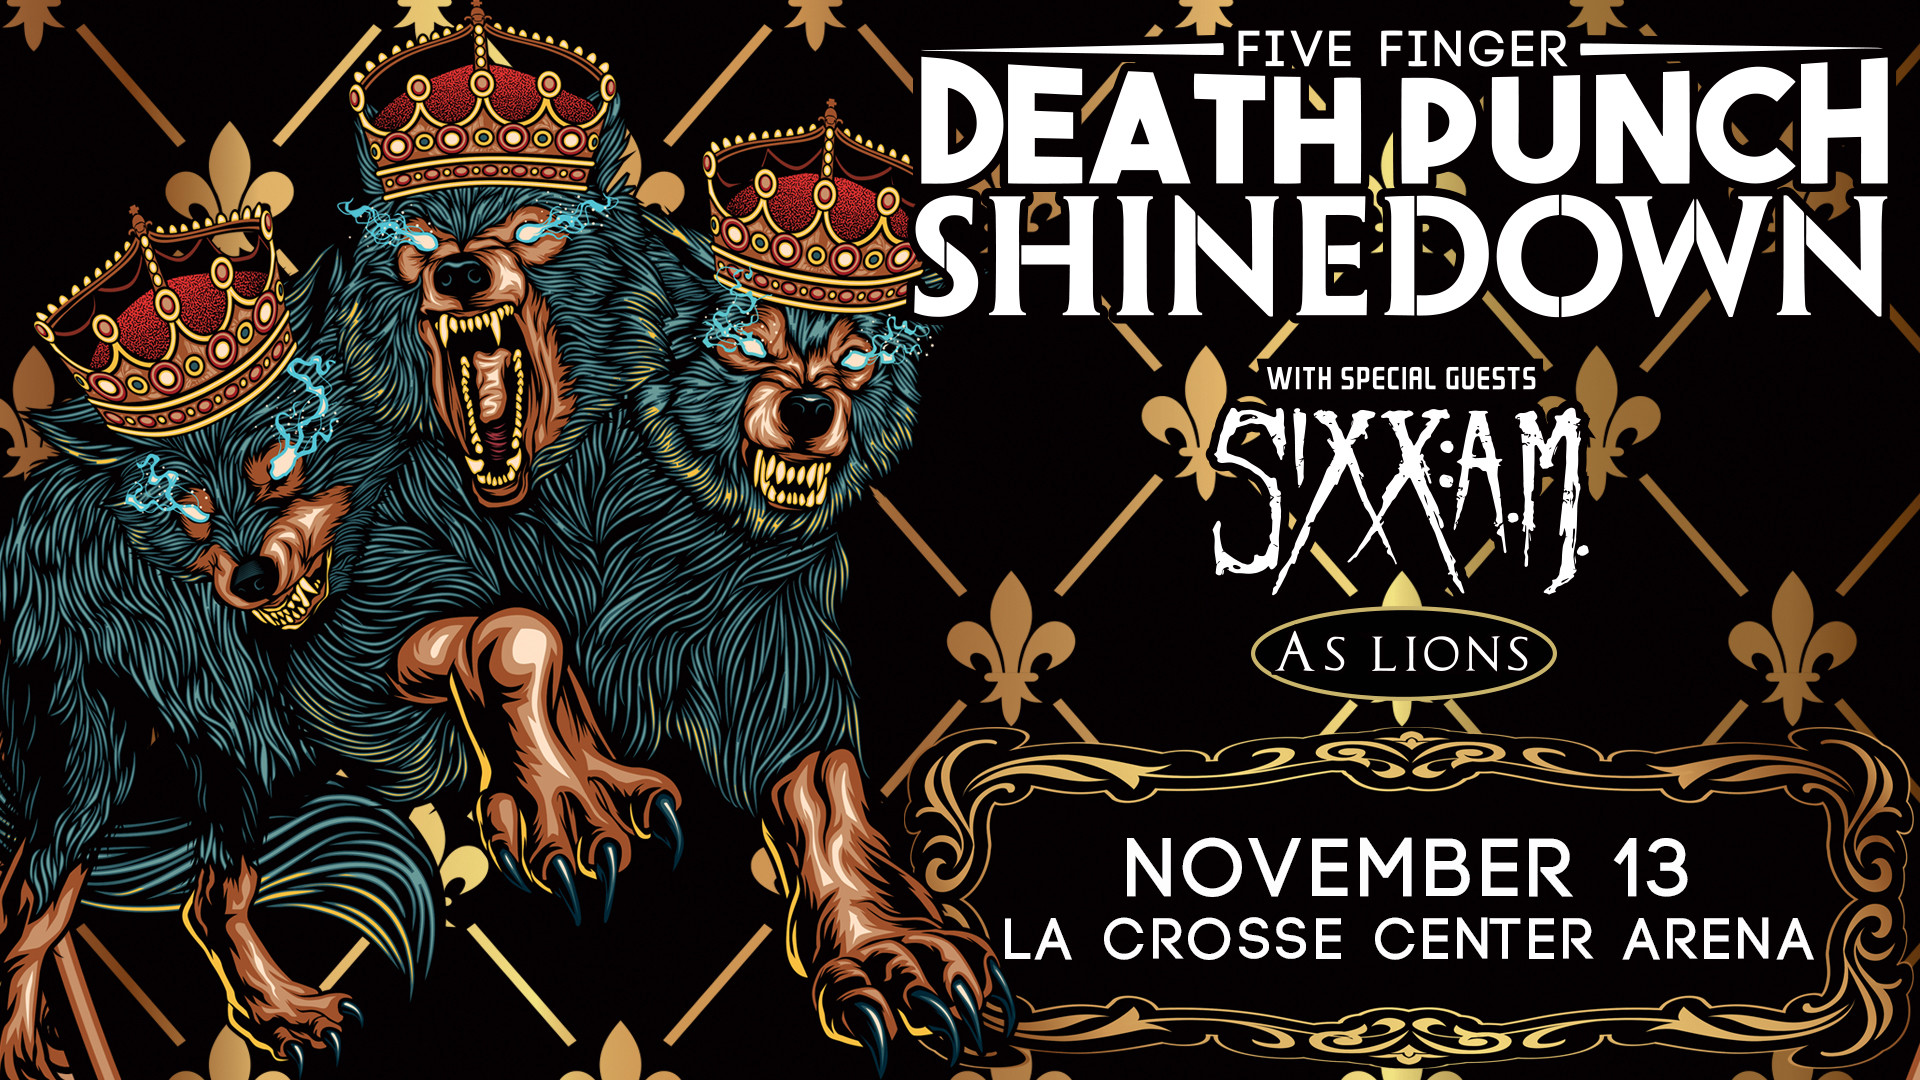 1920x1080 The loudest tour of Fall 2016: Five Finger Death Punch, Shinedown, Sixx AM,  and As Lions take over the La Crosse Center on Sunday, November 13th.